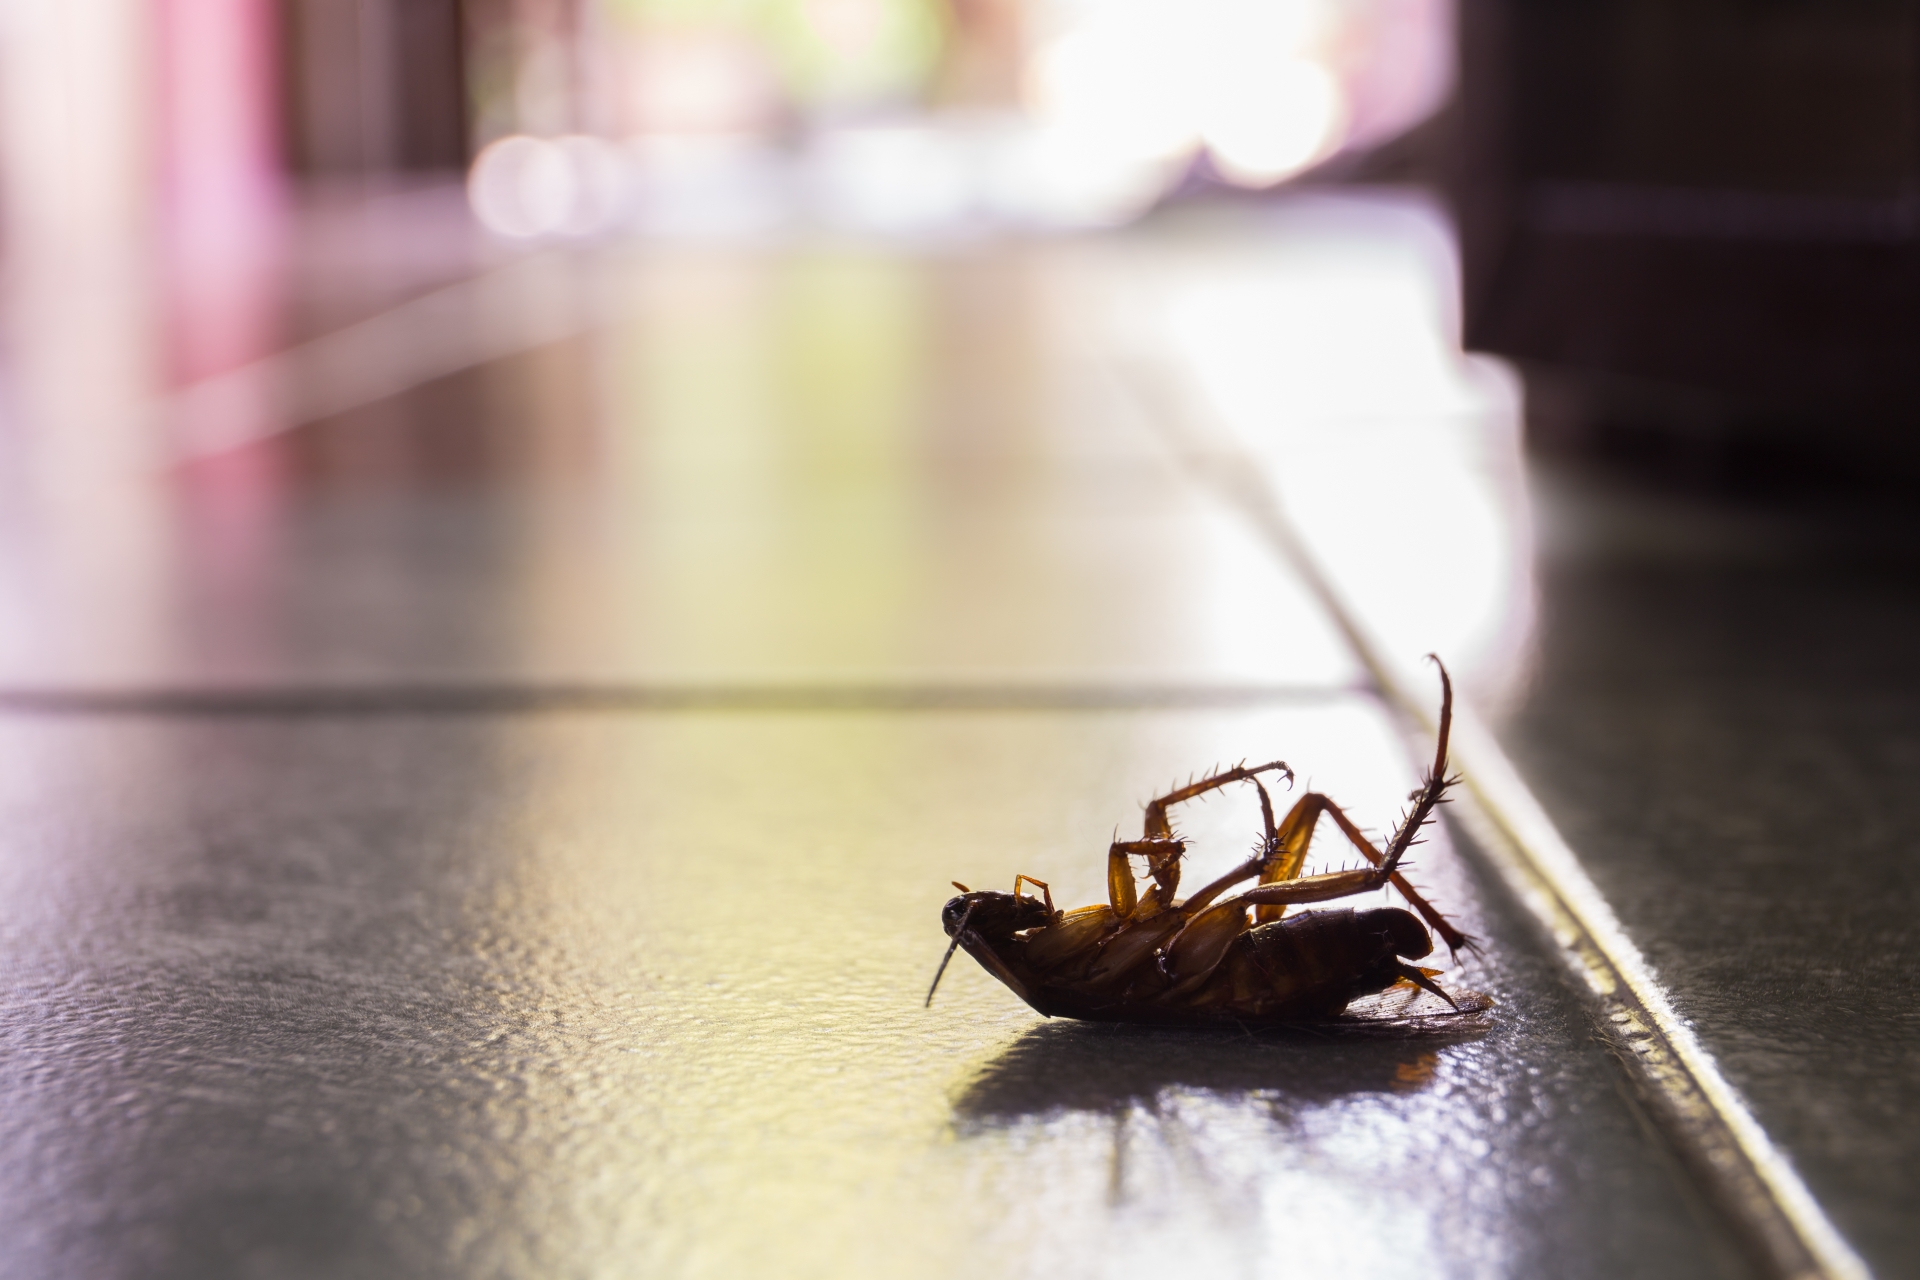 Cockroach Control, Pest Control in Great Bookham, Little Bookham, KT23. Call Now 020 8166 9746